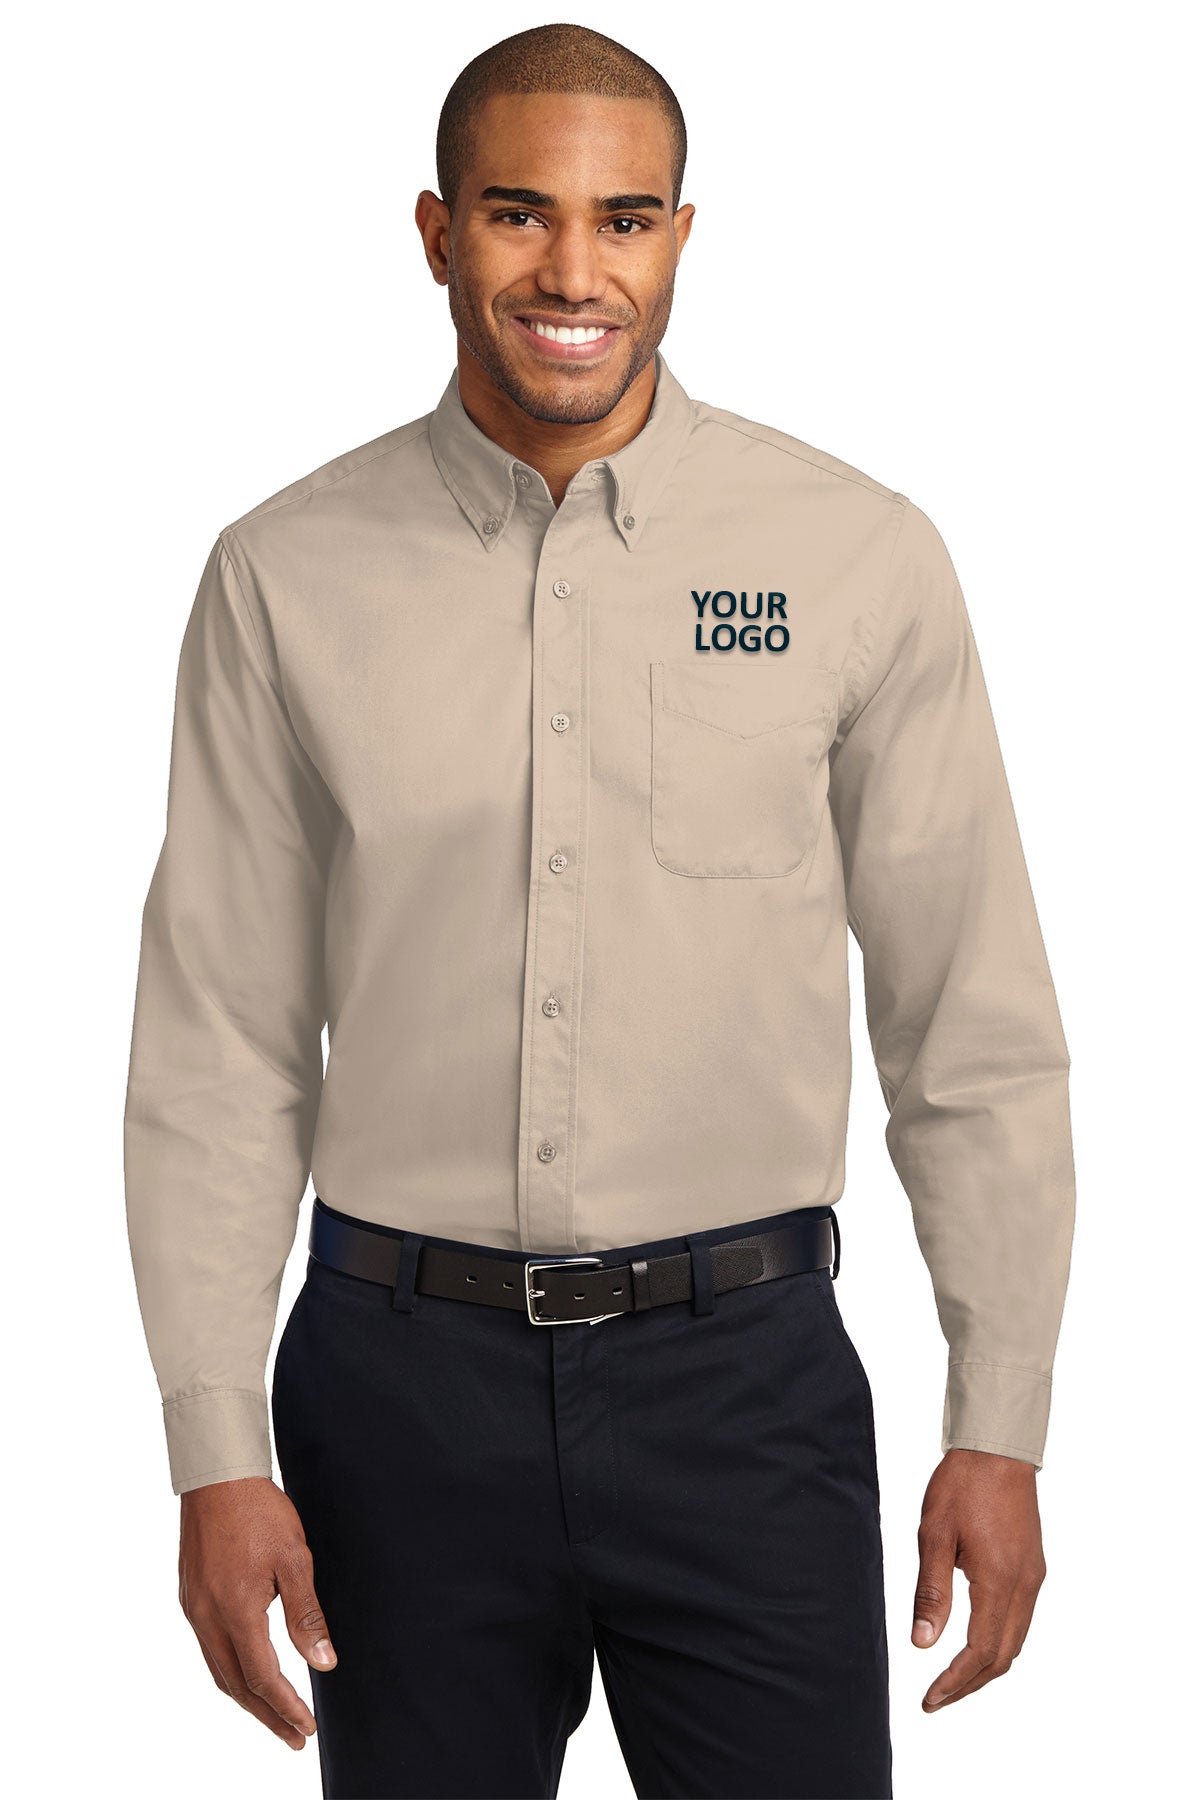 Port Authority Stone S608 business shirts with company logo